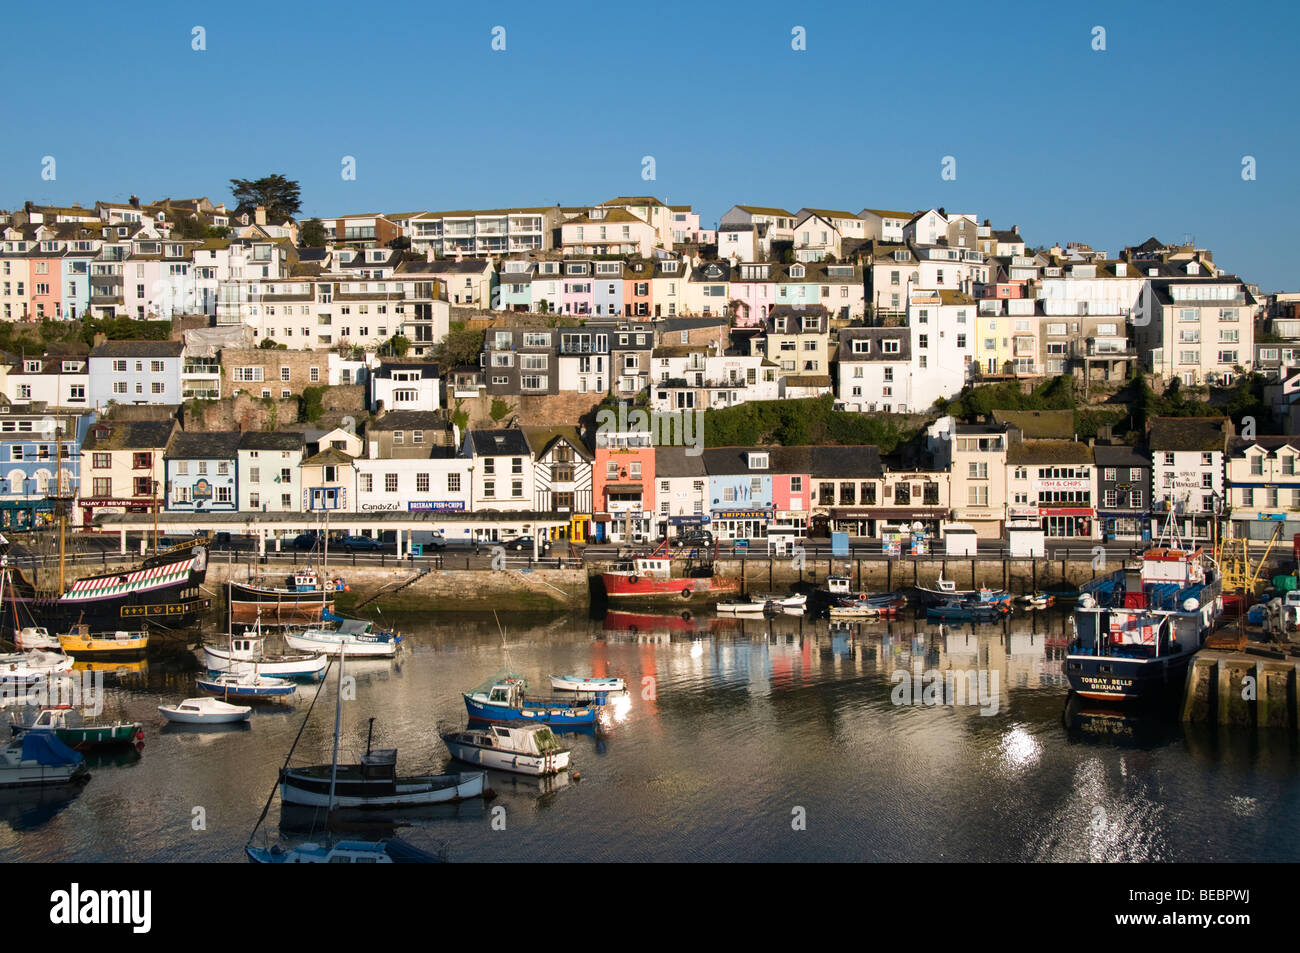 Houses on the hill and moored boats, Brixham Harbour, Devon, UK Stock Photo